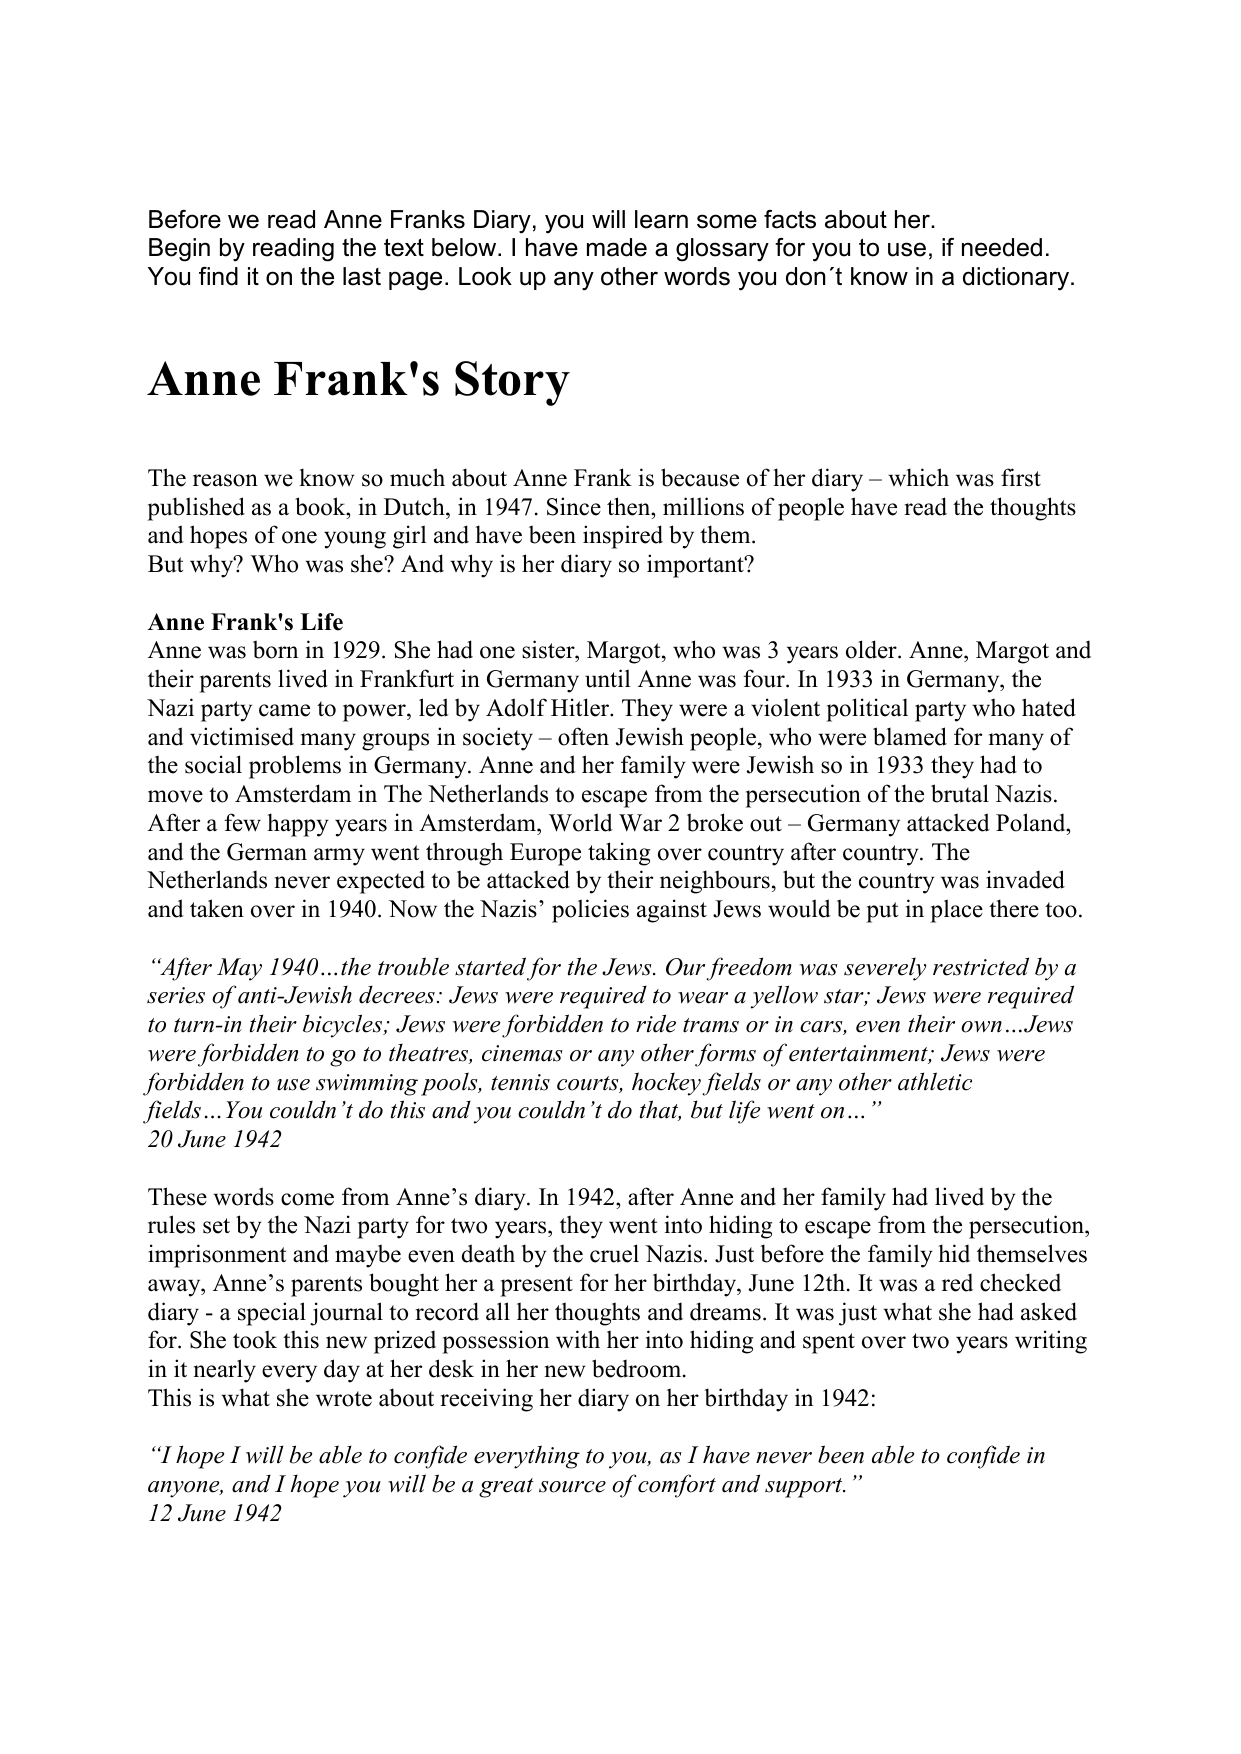 essay on diary of anne frank